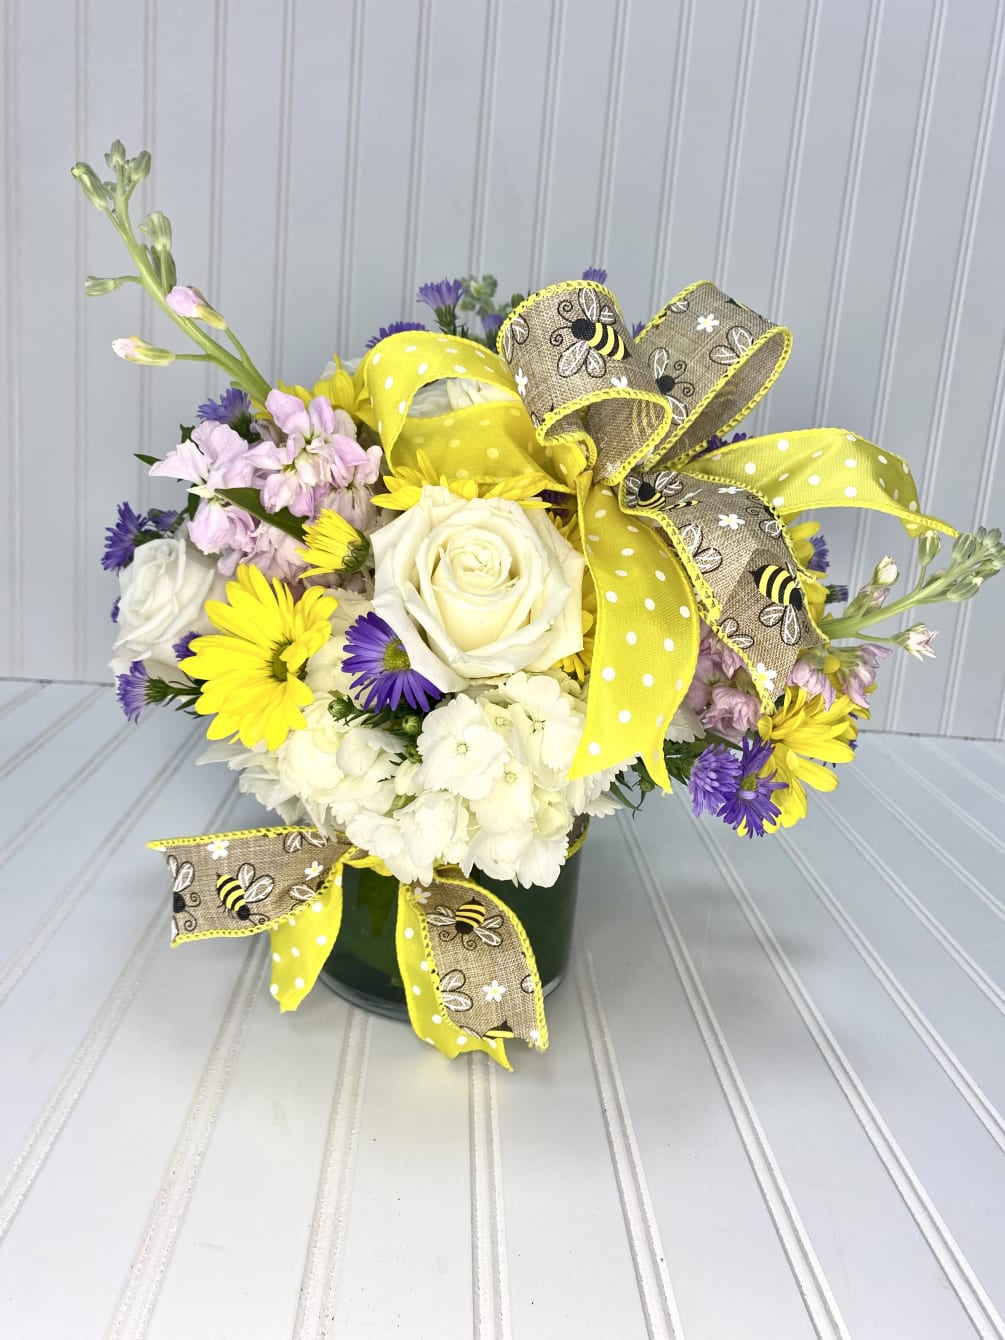 Bzzzzzz catch all the buzz with this charming little arrangement filled with